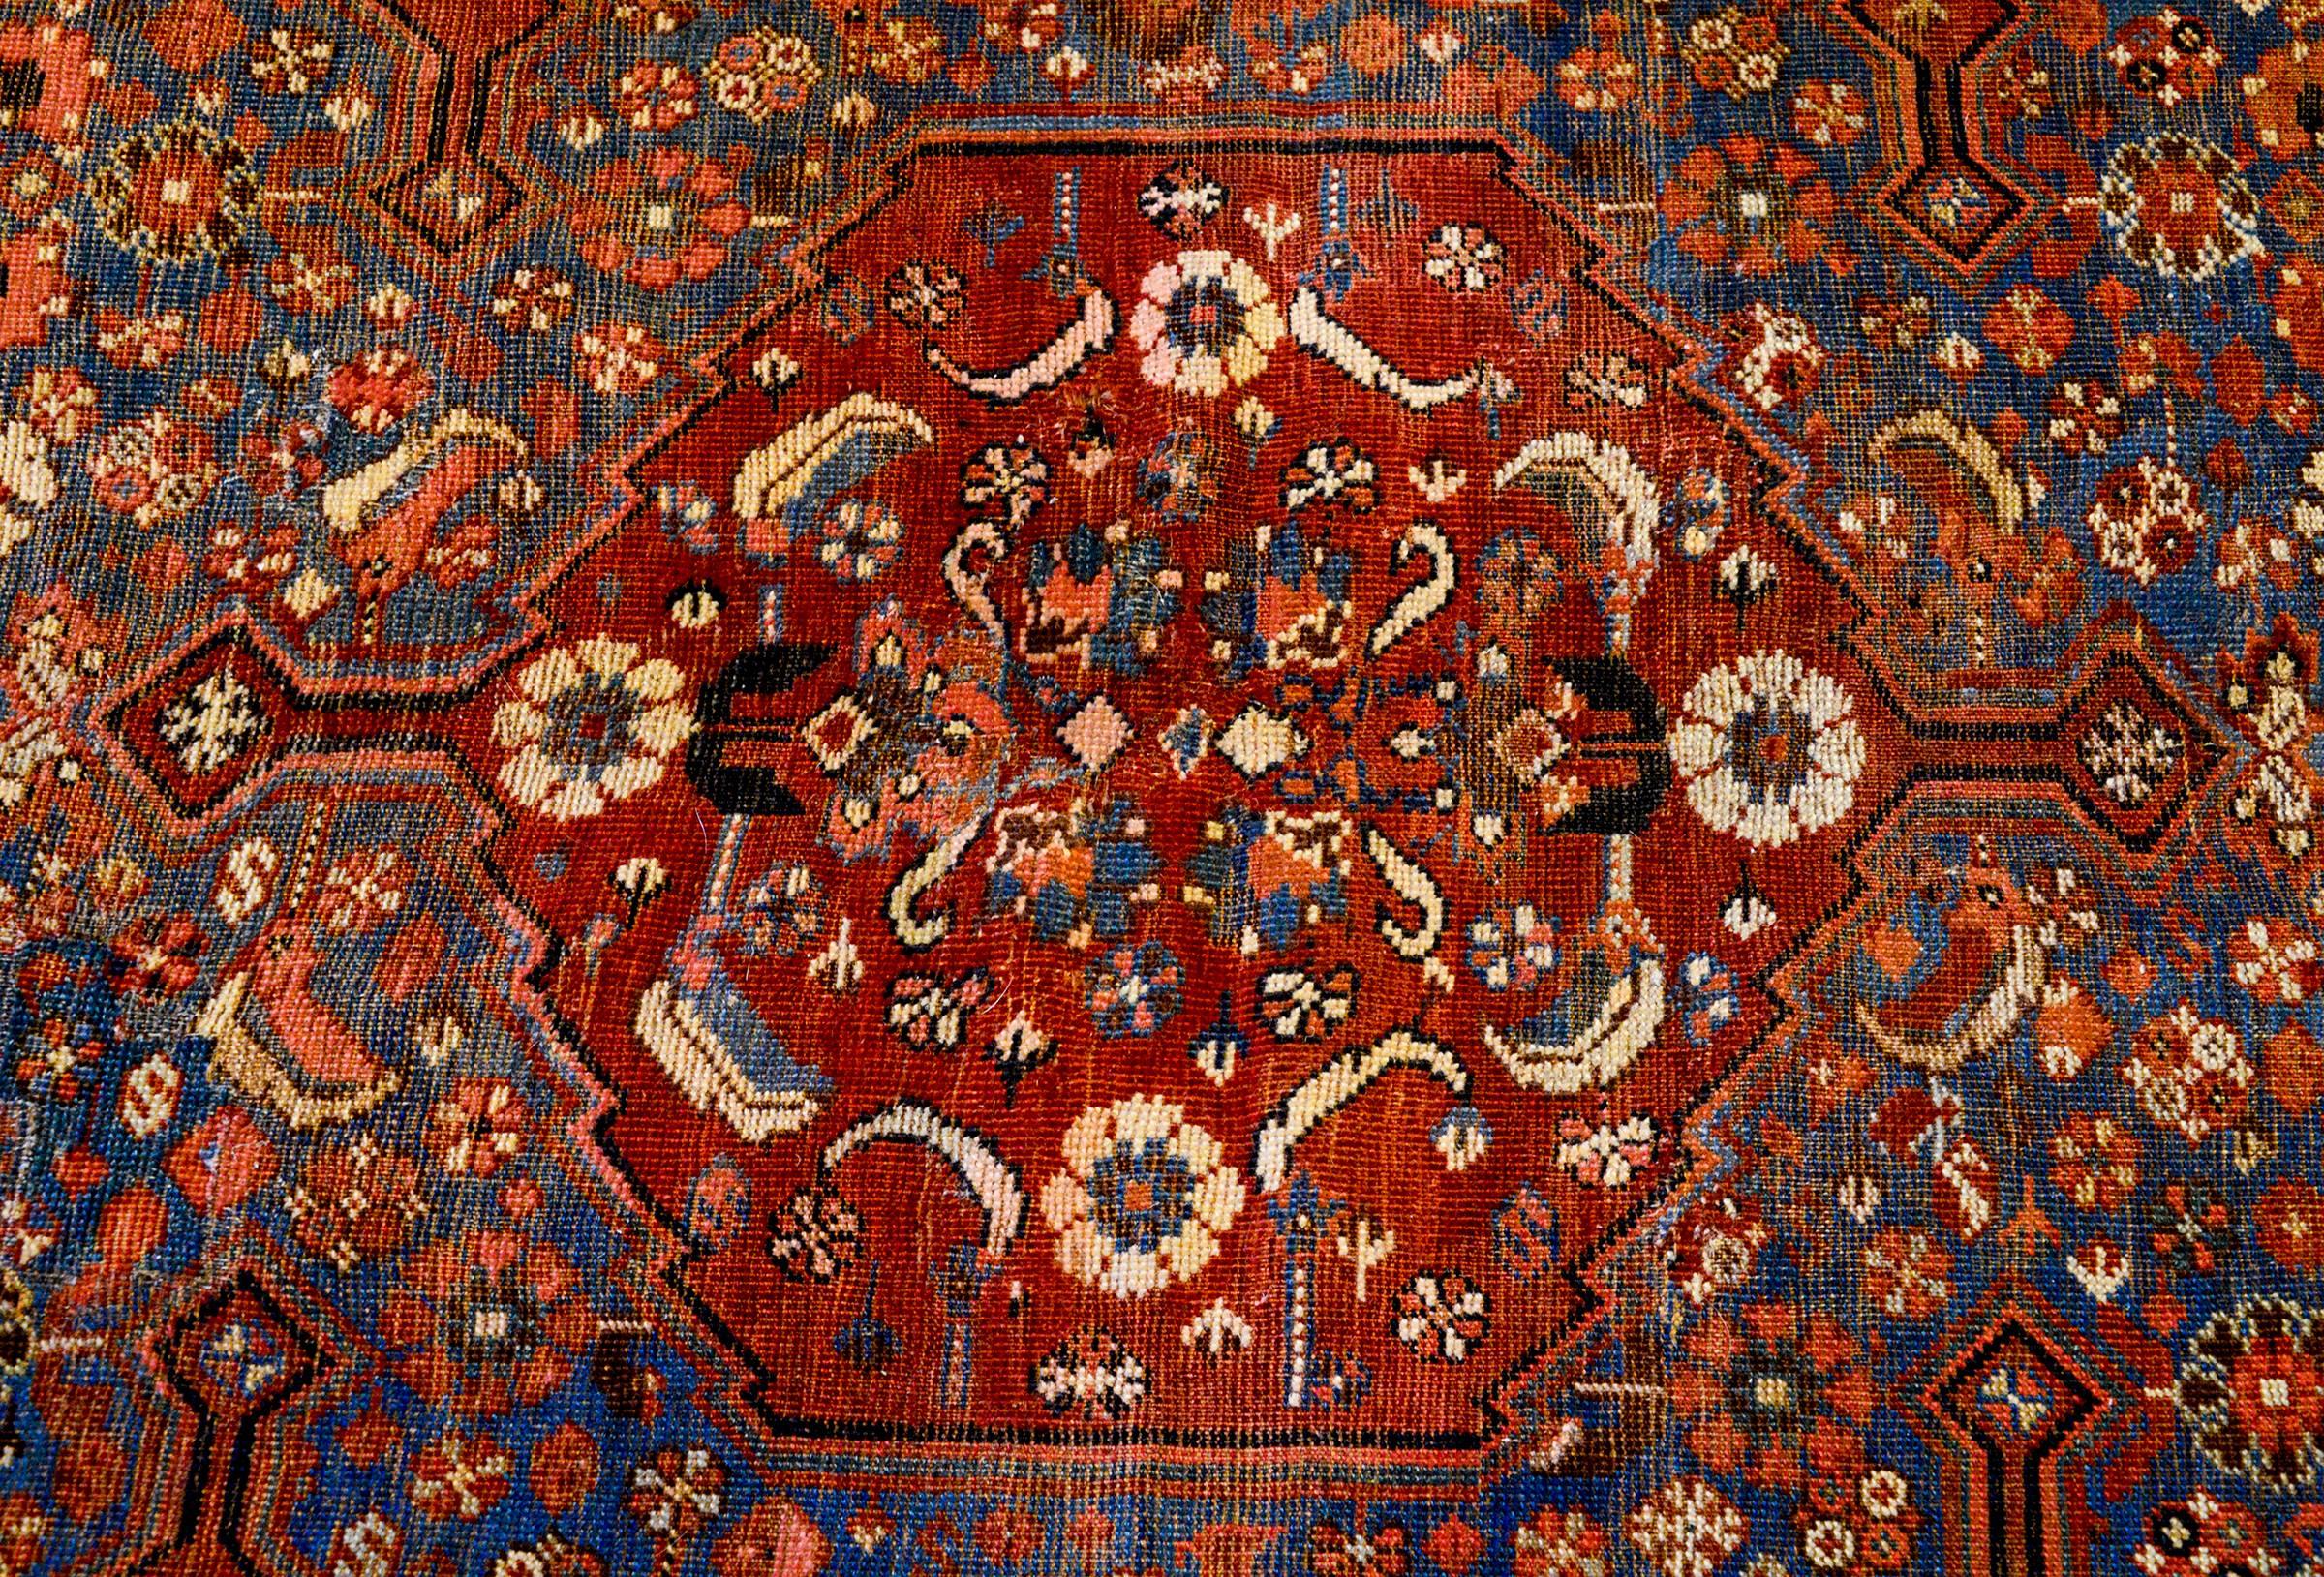 An outstanding, really fine, 19th century Persian Qashqai rug with an incredible pattern containing a large crimson medallion filled with leaves and flowers, amidst a field of myriad flowers, on a beautiful abrash indigo background. The border is